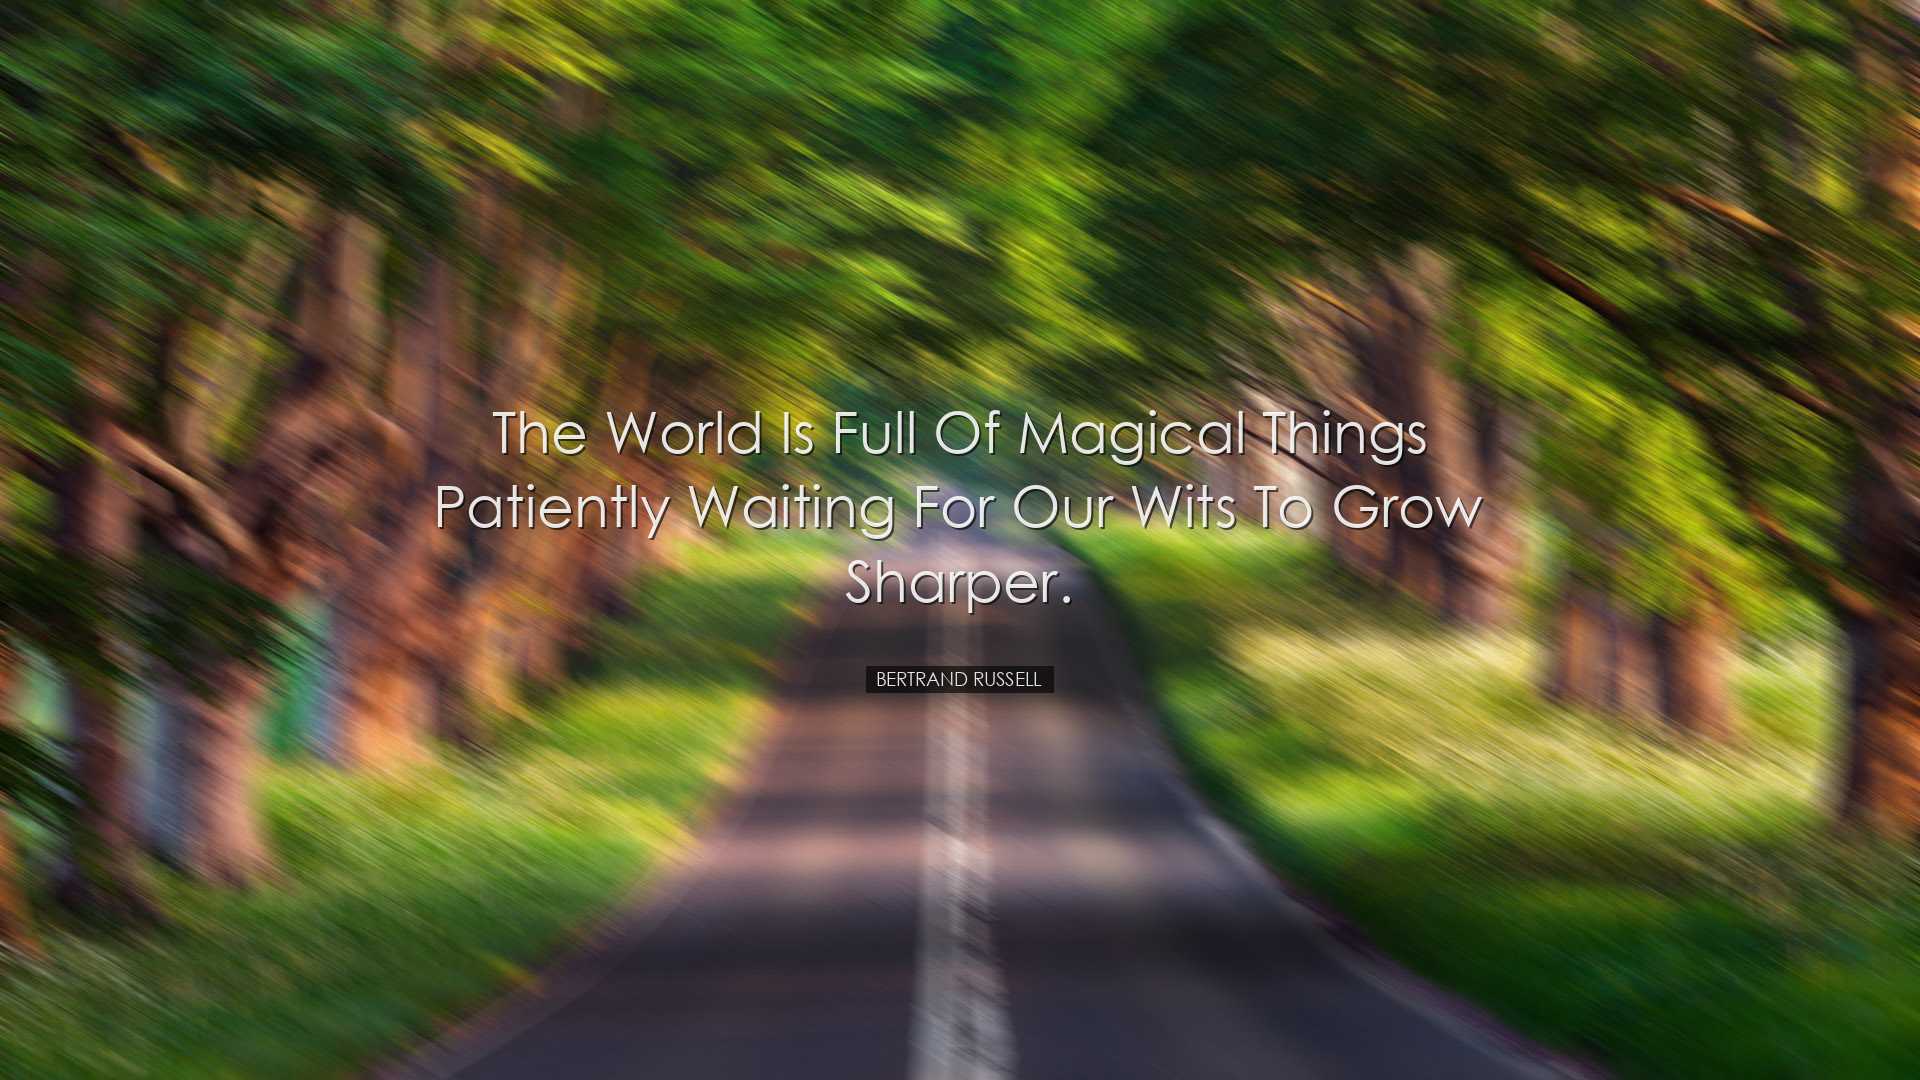 The world is full of magical things patiently waiting for our wits